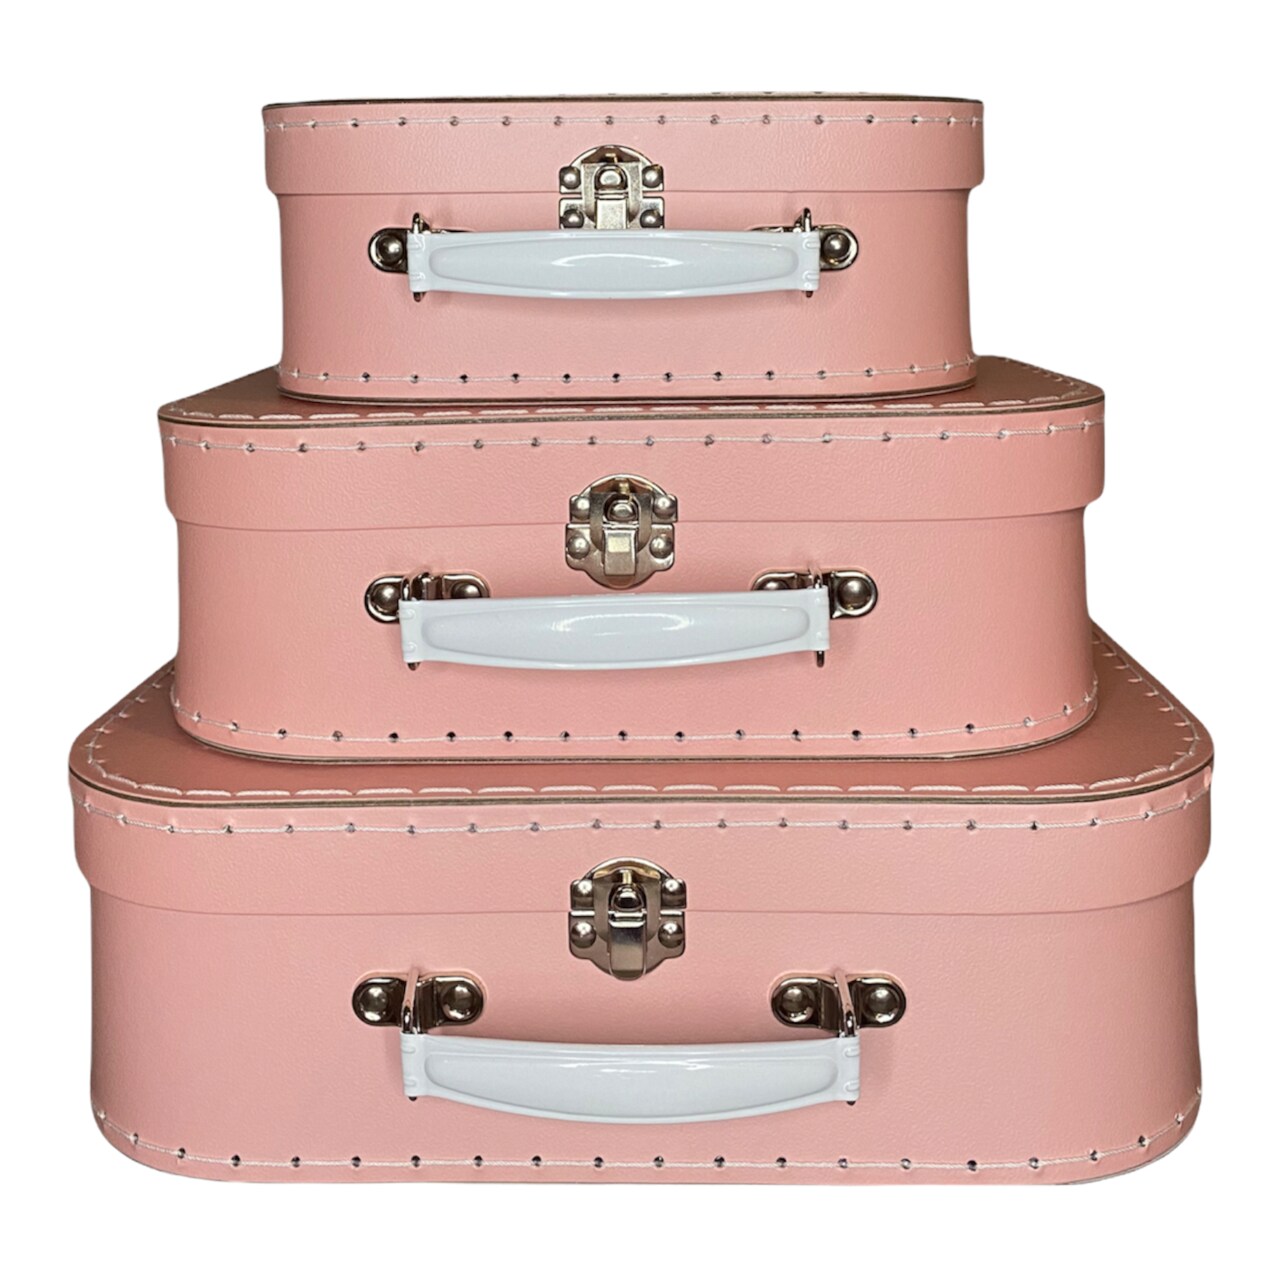 Pink Paperboard Suitcase Decorative Storage Box - Set of 3 or 1 Box of Specific Design